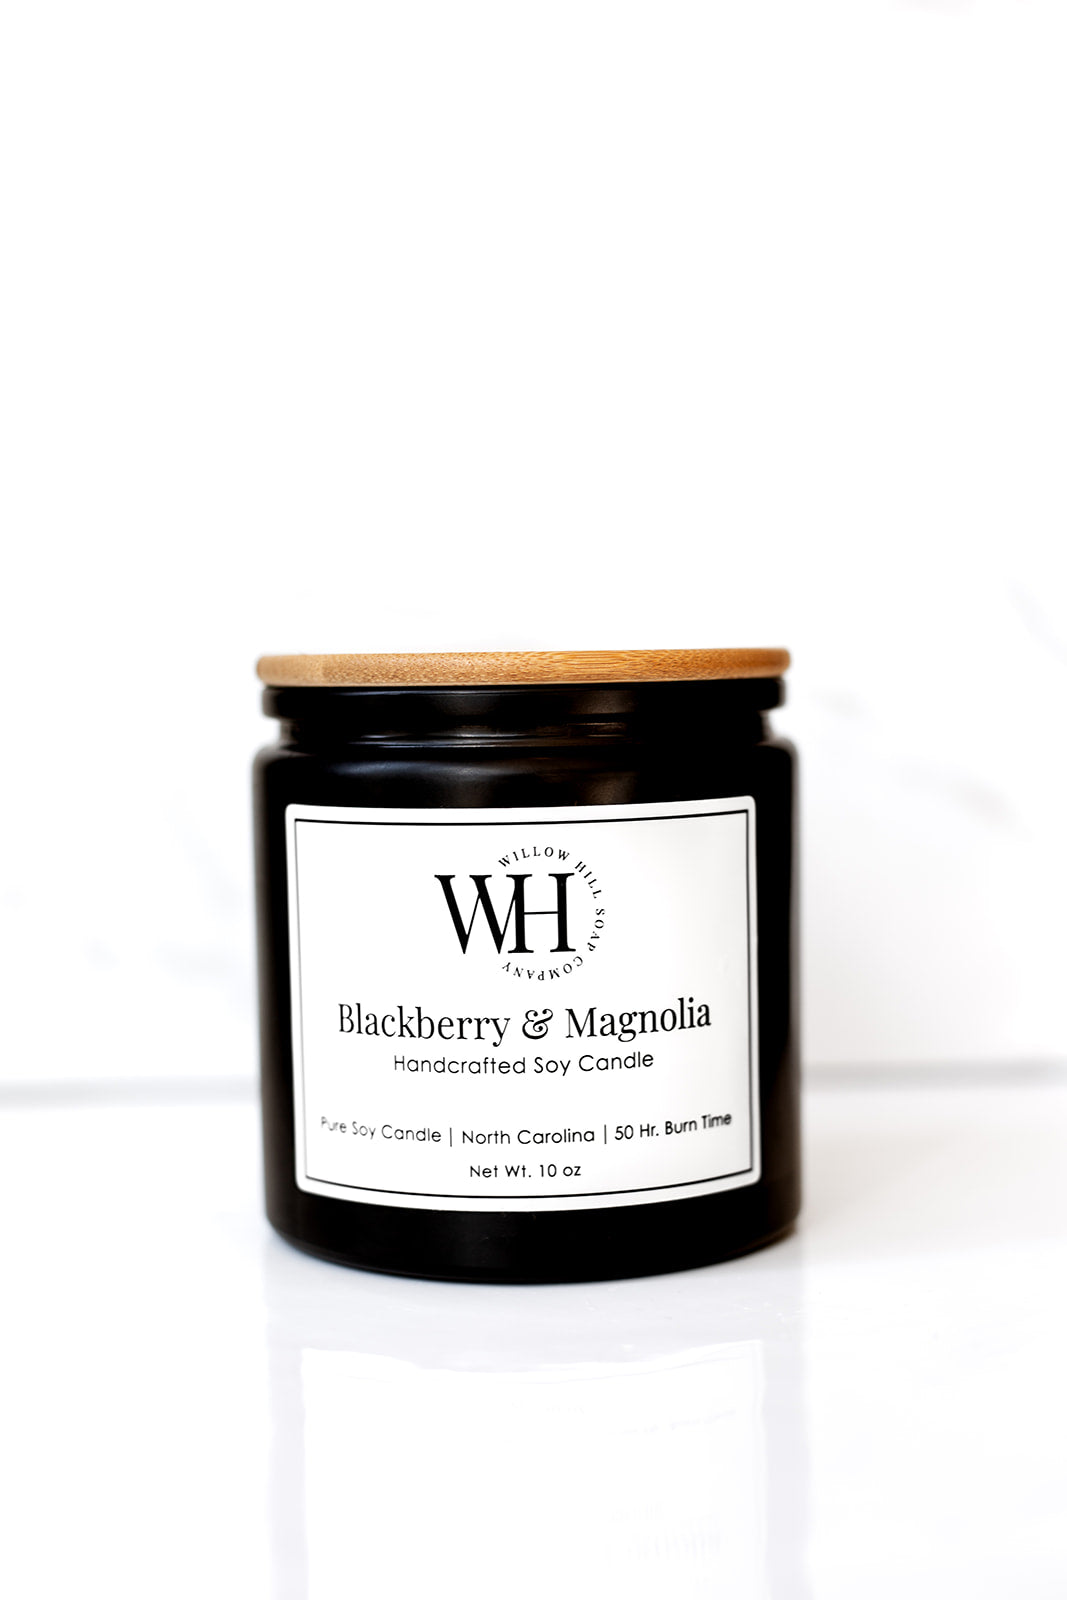 Blackberry & Magnolia Soy Candle